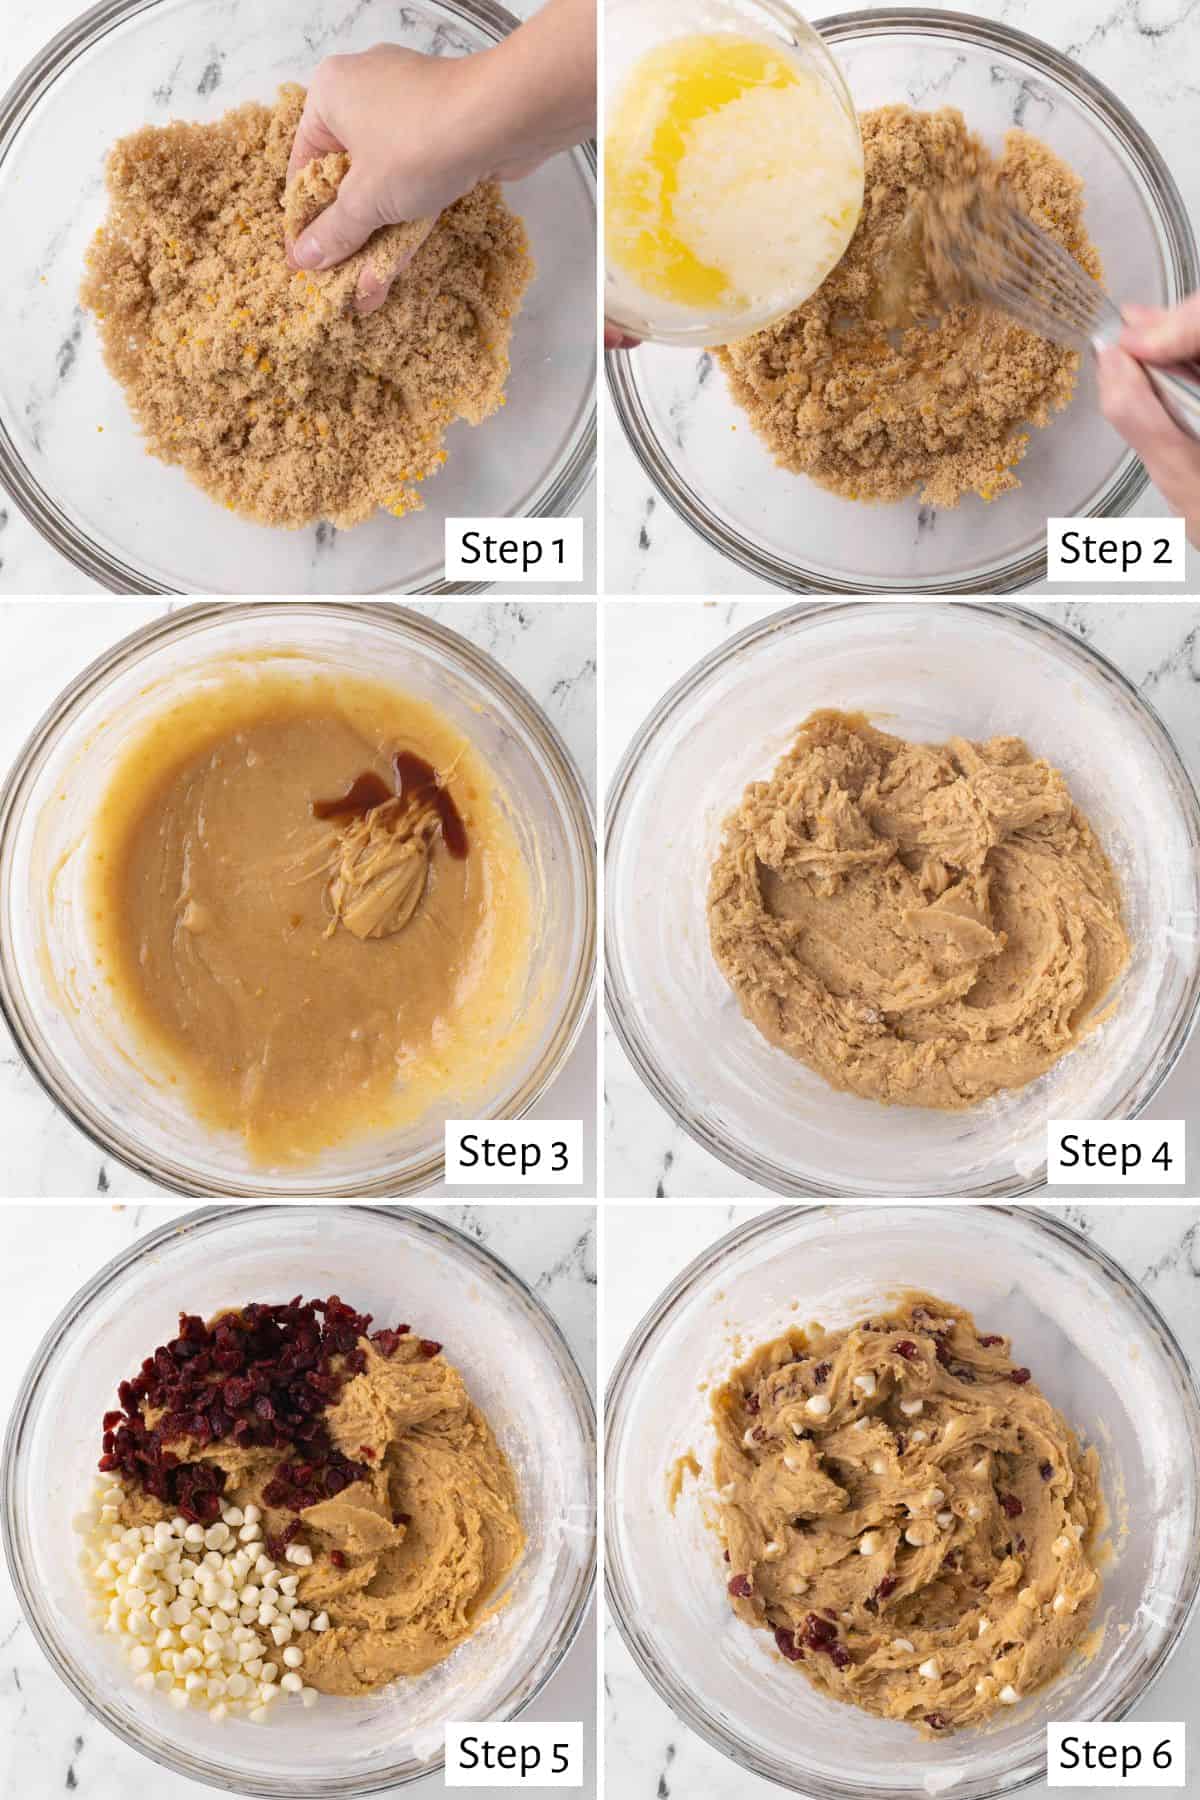 6 image collage making bar dough in a bowl: 1- hand massaging brown sugar and orange zest, 2- hand whisking sugar with melted butter being poured in, 3- after eggs are mixed in with vanilla added, 4- after folding in dry ingredients, 5- dried cranberries and white chocolate chips added 6- final dough.